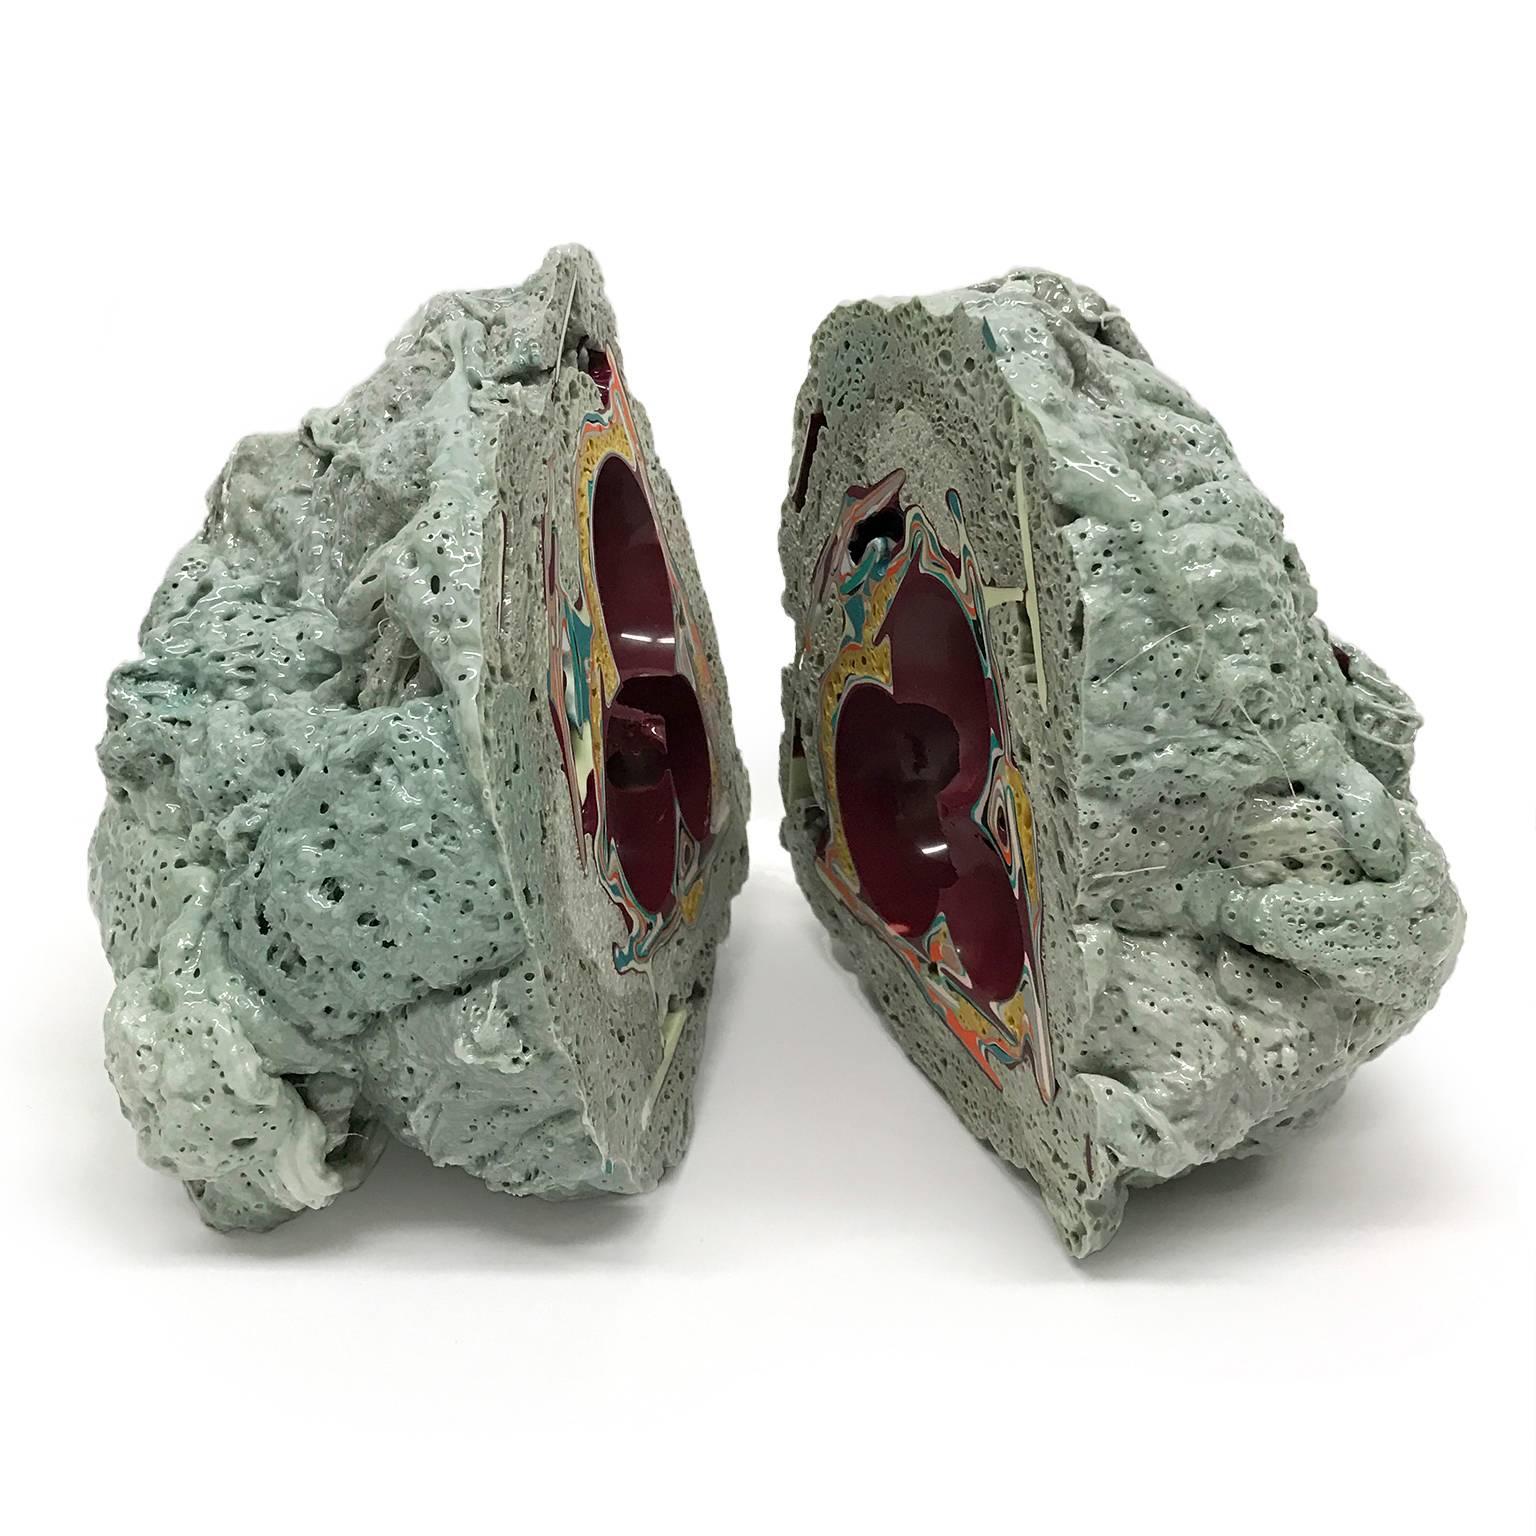 Contemporary Unique Handmade Geode Sculpture in Burgundy and Sage Green For Sale